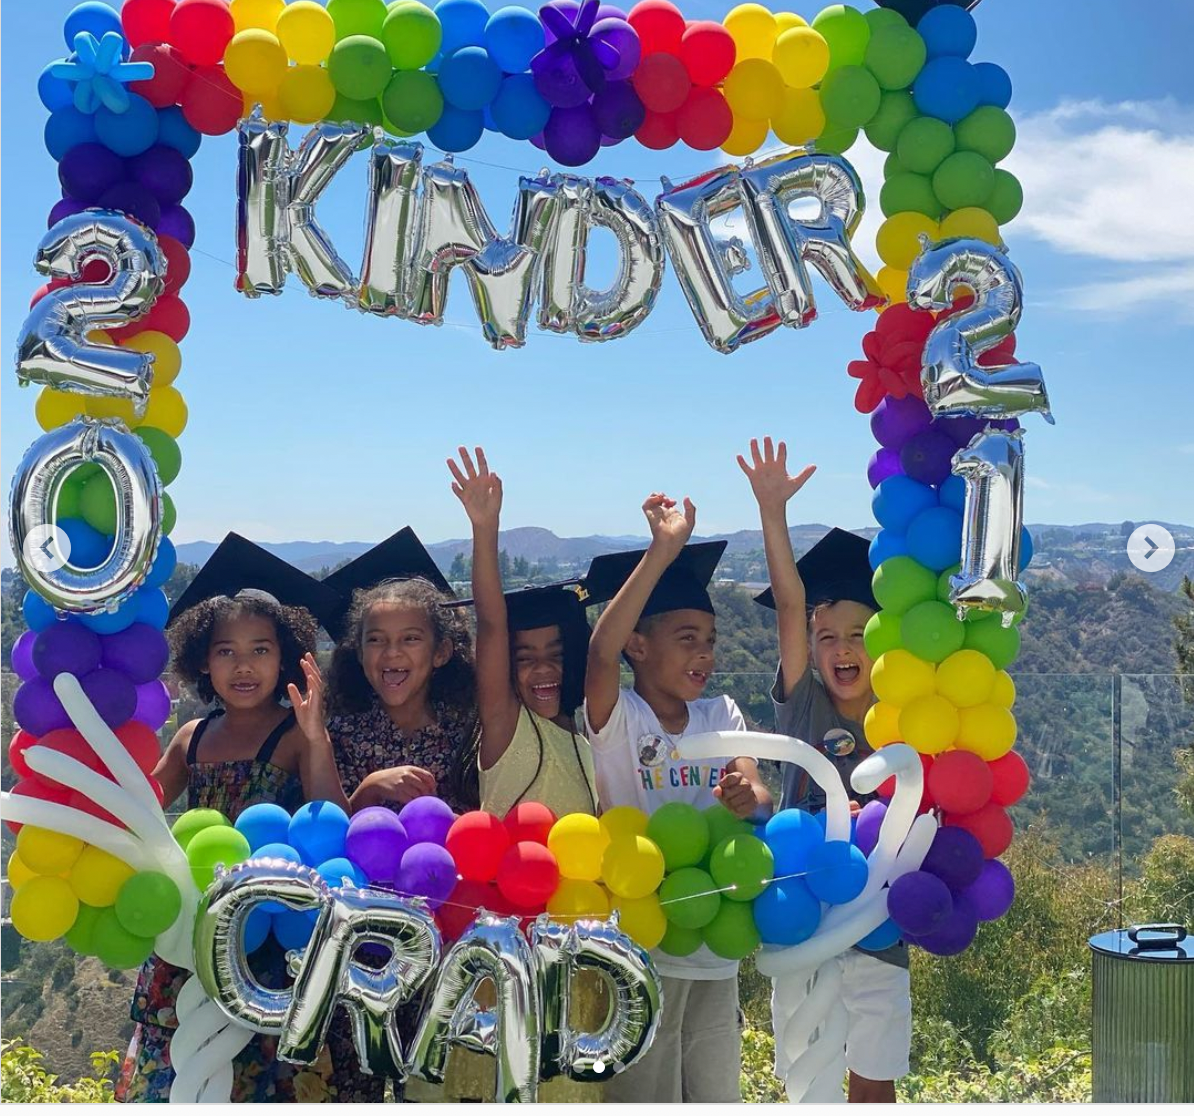 Kelly Rowland's son Titan poses with other graduands at his Kindergarten graduation ceremony. | Photo: Instagram/@Kellyrowland